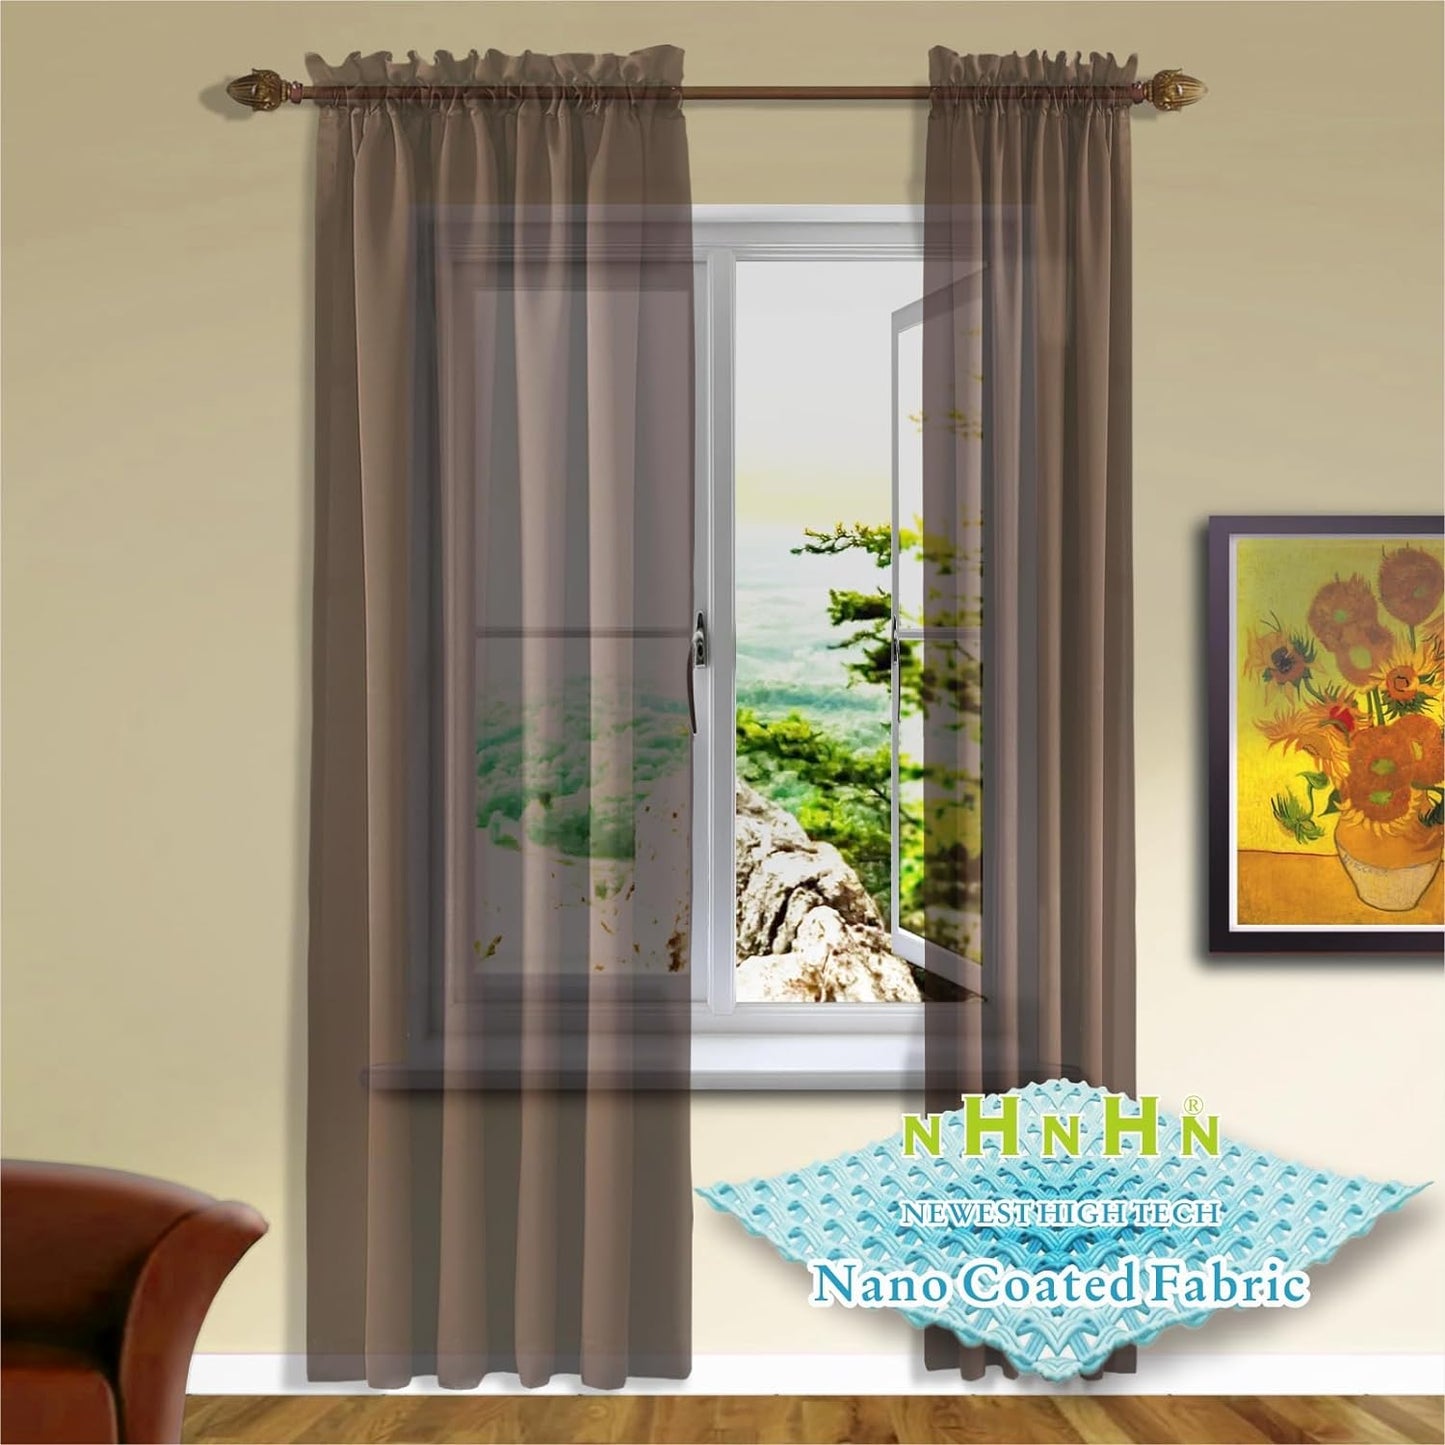 NHNHN Nano Material Coated White Sheer Curtains 84 Inches Long, Rod Pocket Window Drapes Voile Sheer Curtain 2 Panels for Living Room Bedroom Kitchen (White, W52 X L84)  NHNHN Light Brown 52W X 72L | 2 Panels 